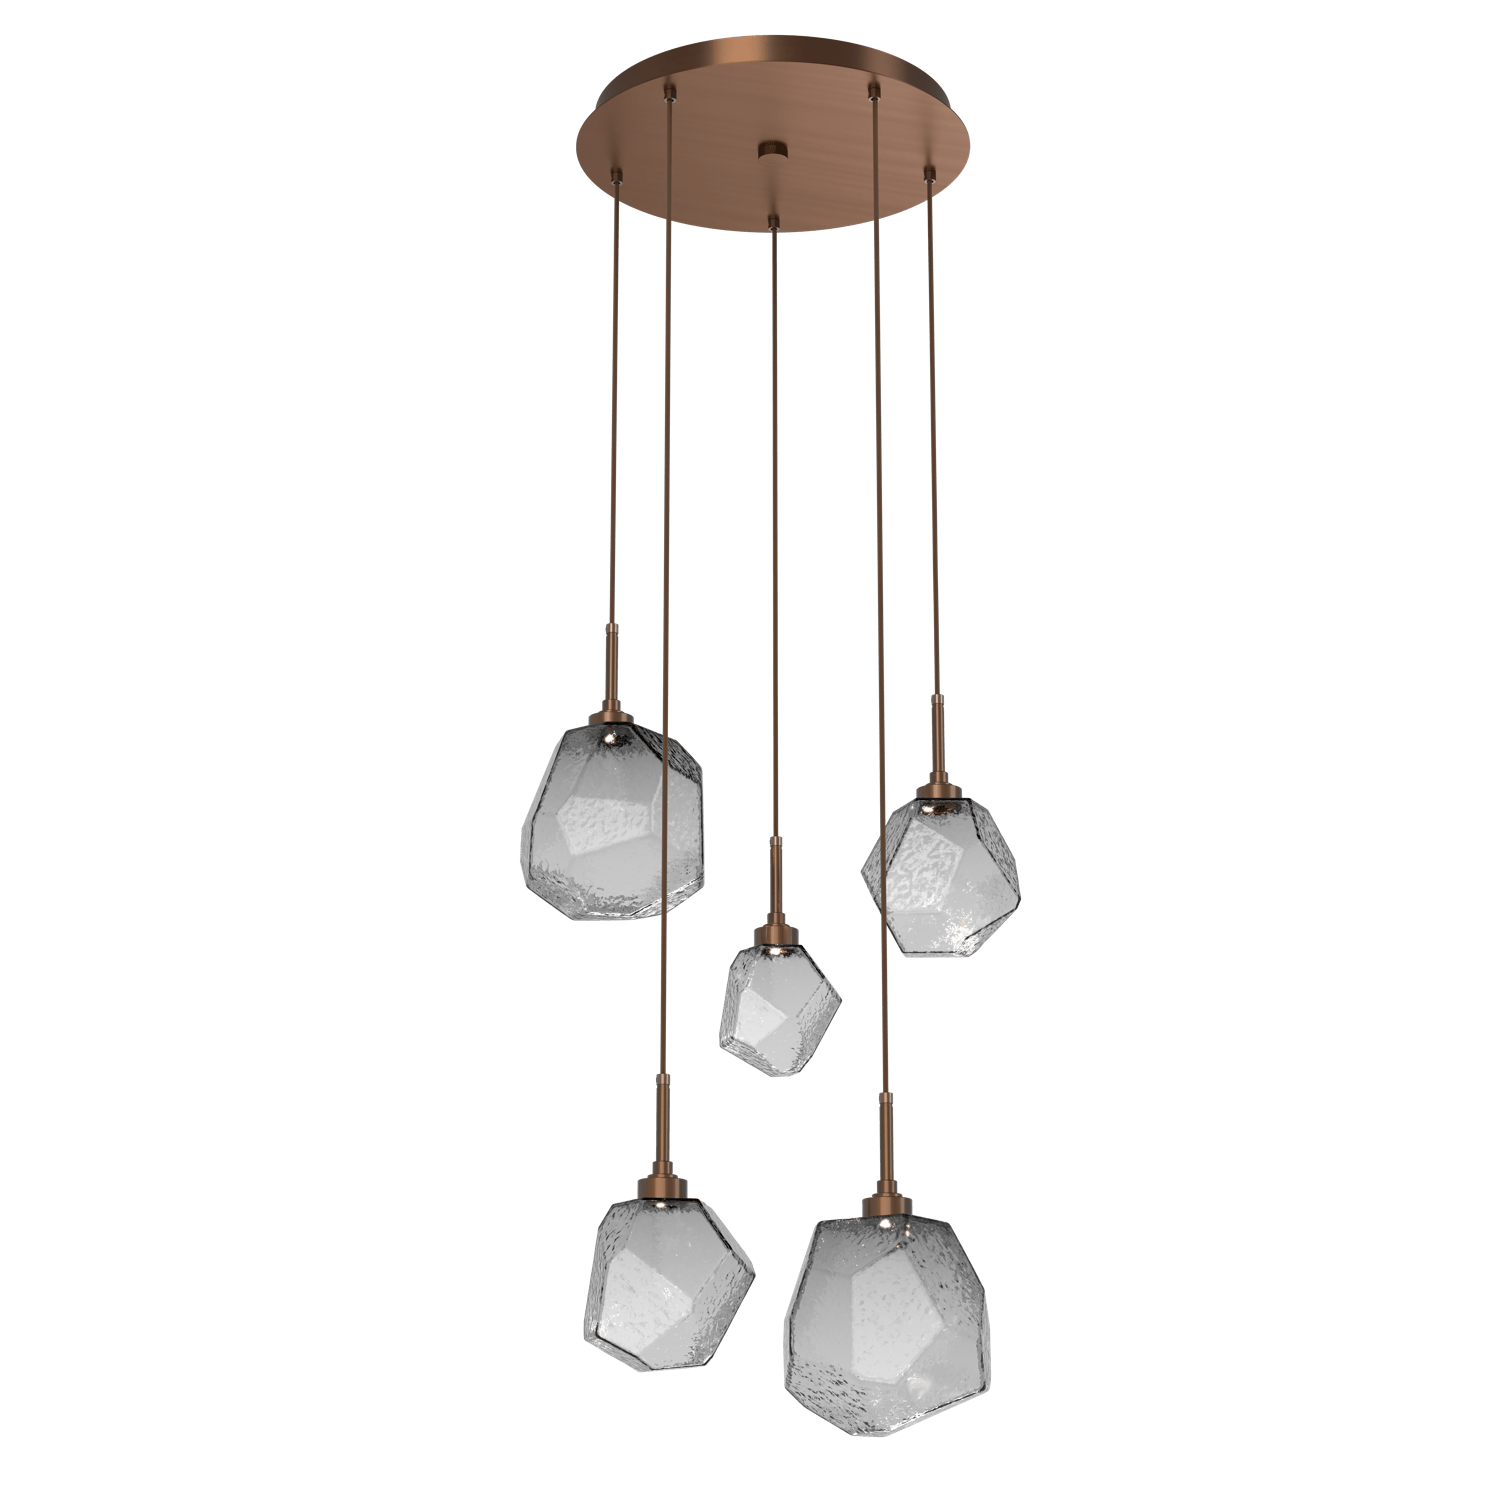 CHB0039-05-RB-S-Hammerton-Studio-Gem-5-light-round-pendant-chandelier-with-oil-rubbed-bronze-finish-and-smoke-blown-glass-shades-and-LED-lamping